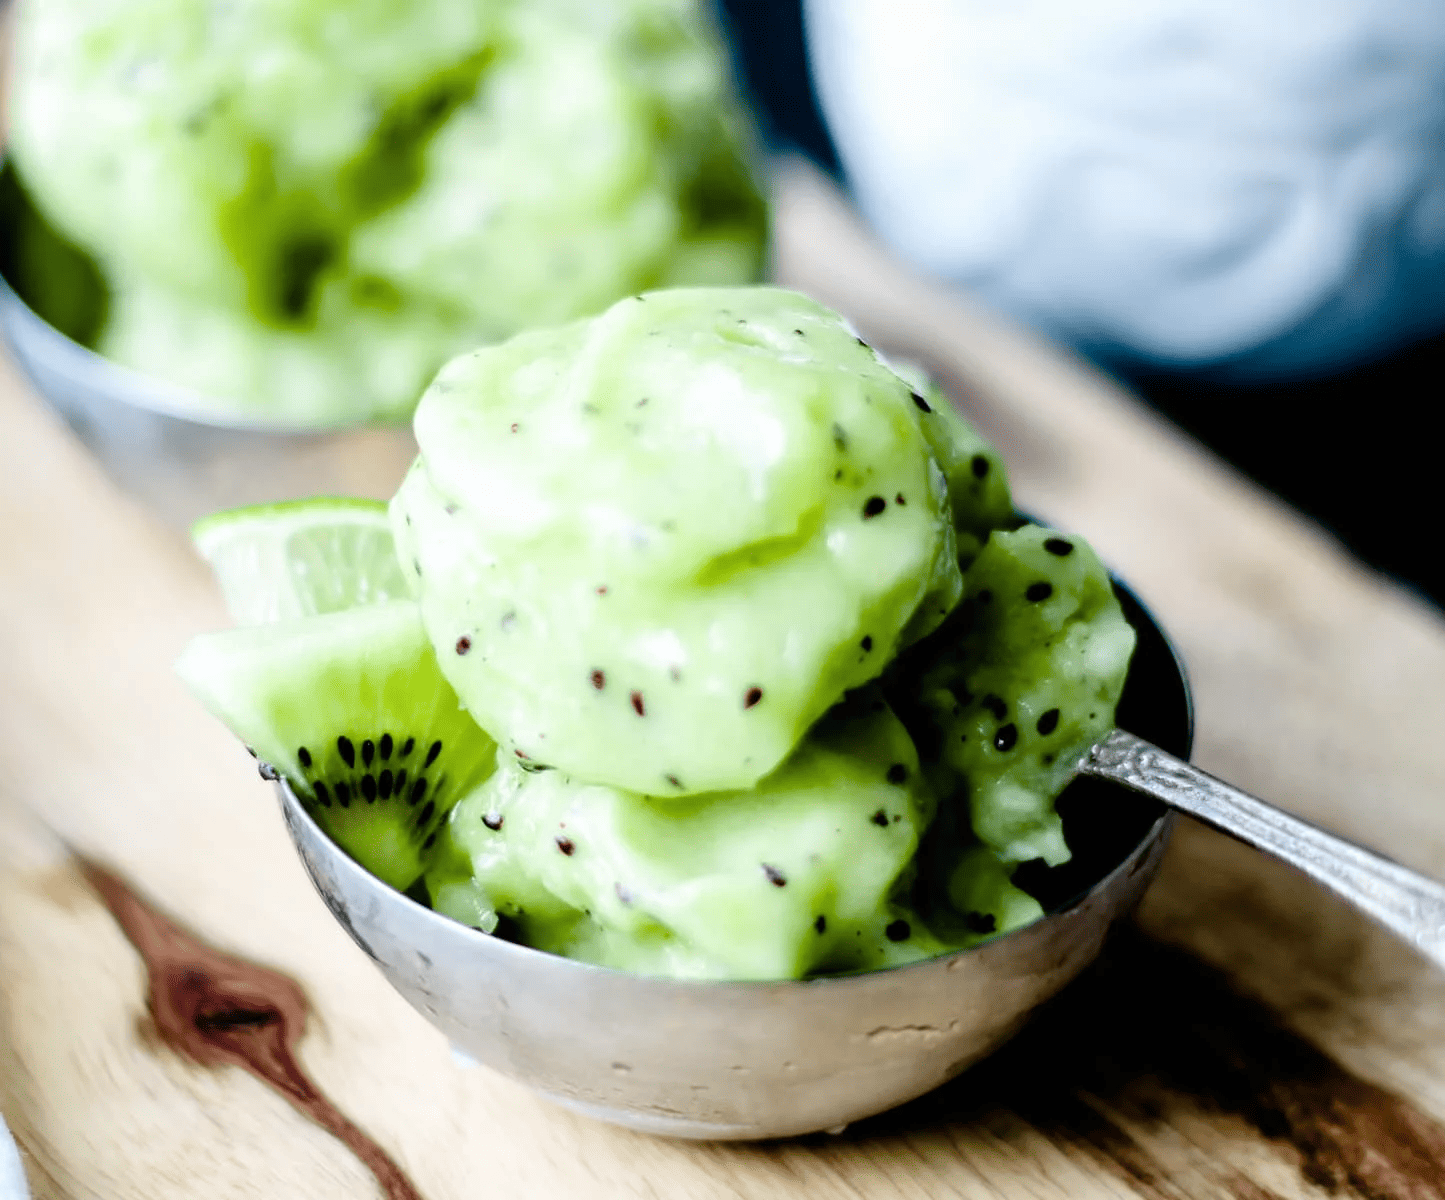 A bowl of kiwi sorbet on a wooden board.